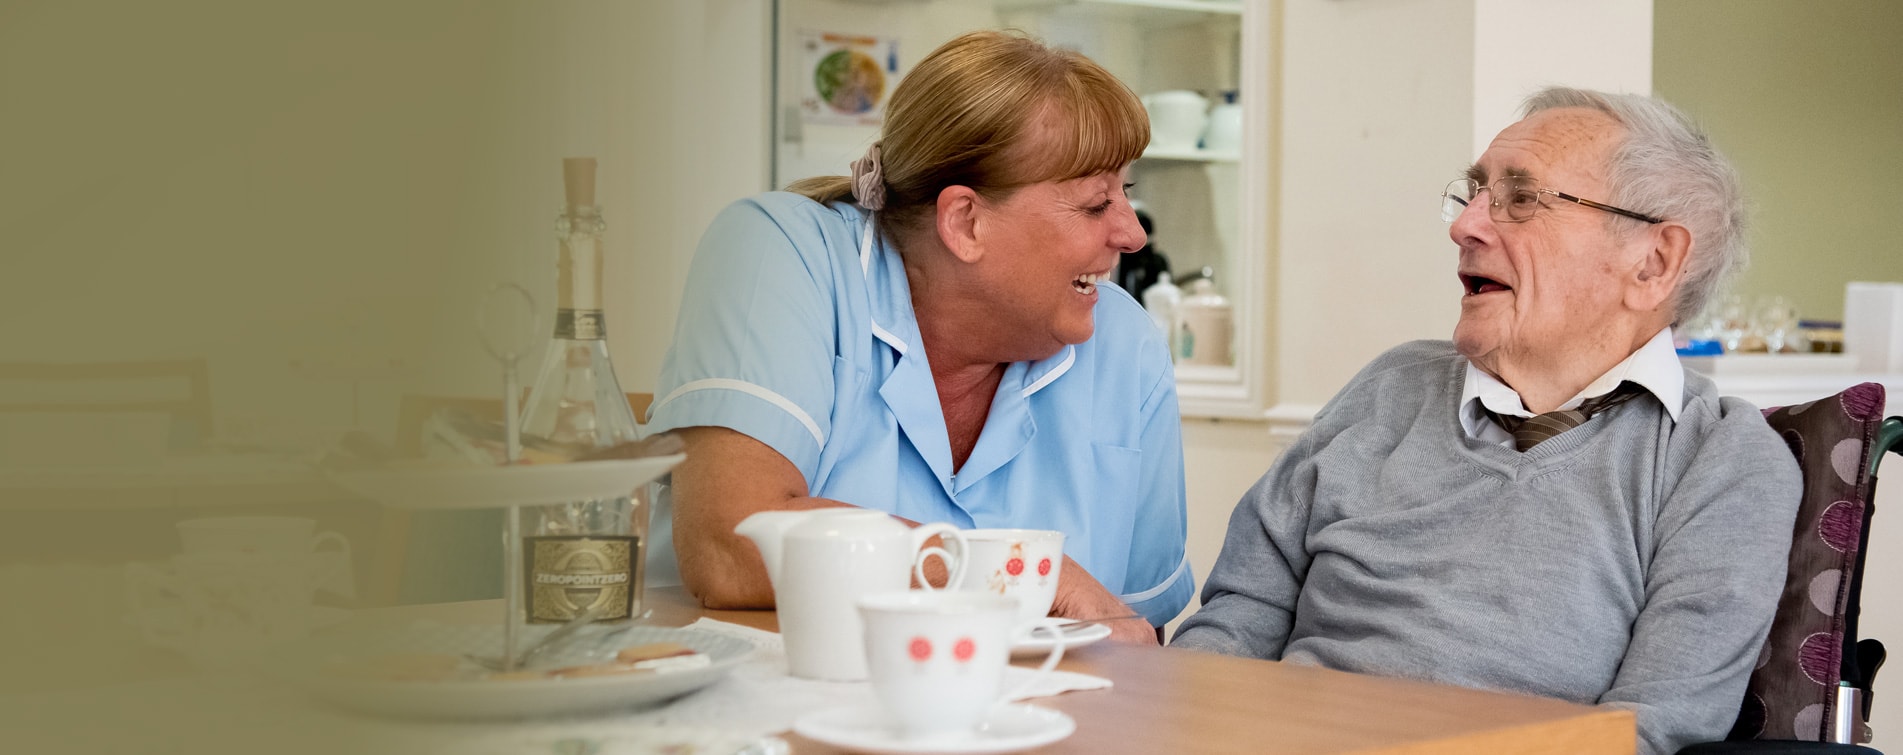 Residential, nursing, respite and dementia care in Shropshire